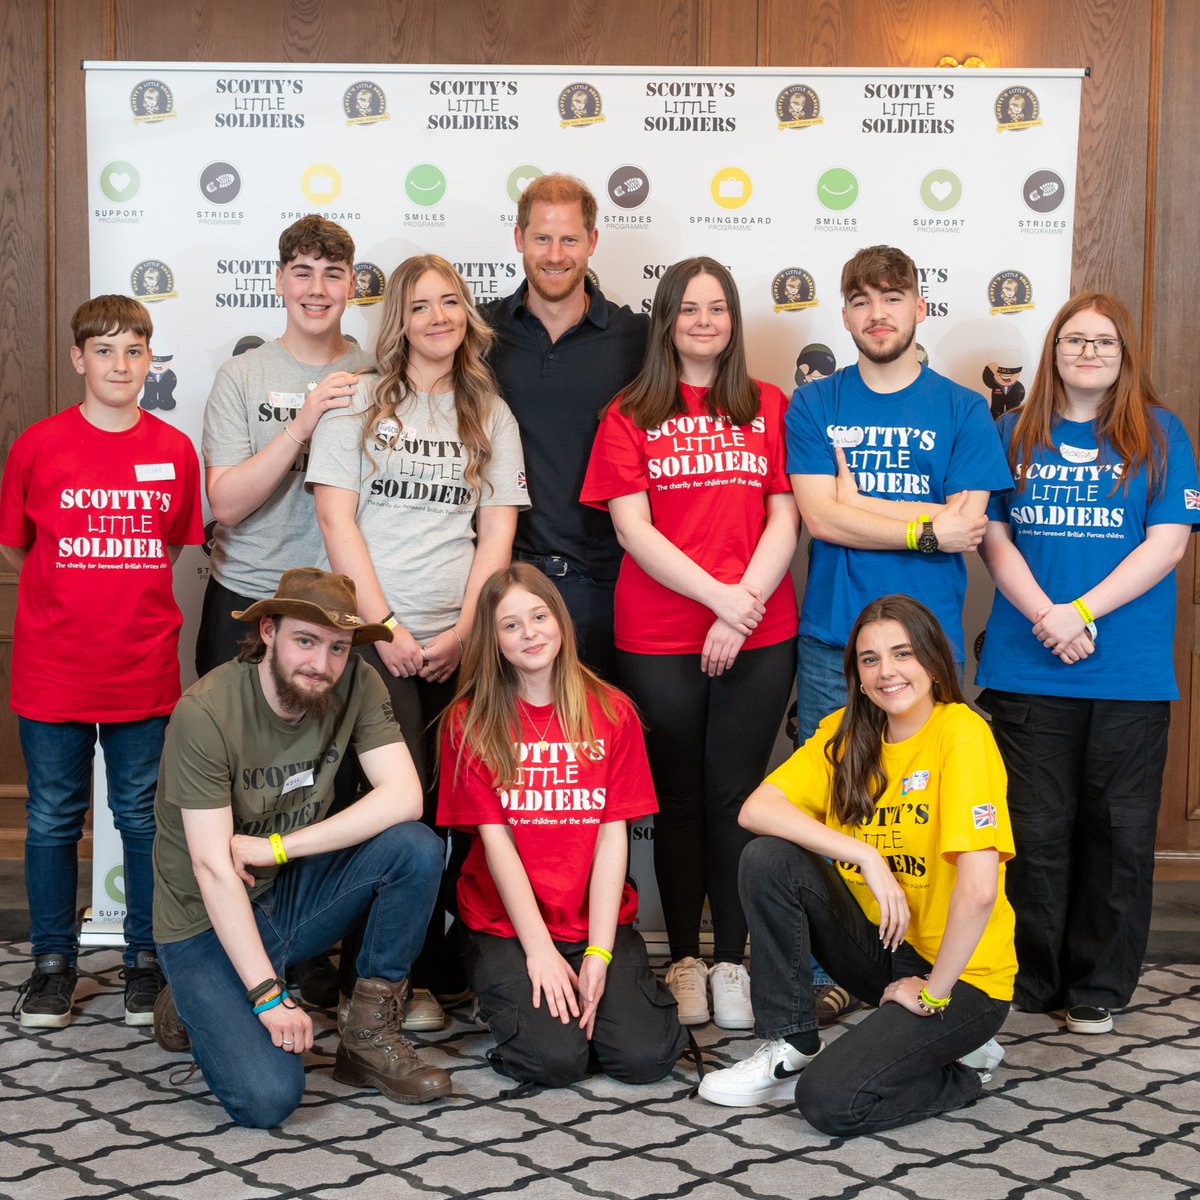 During his recent visit, #PrinceHarry dedicated time to a discussion with 9 members of our #ScottysCouncil. They shared their experiences of growing up without a parent, & the crucial support they receive from Scotty's. Read more: bit.ly/3UPT5My #MilitaryFamilies